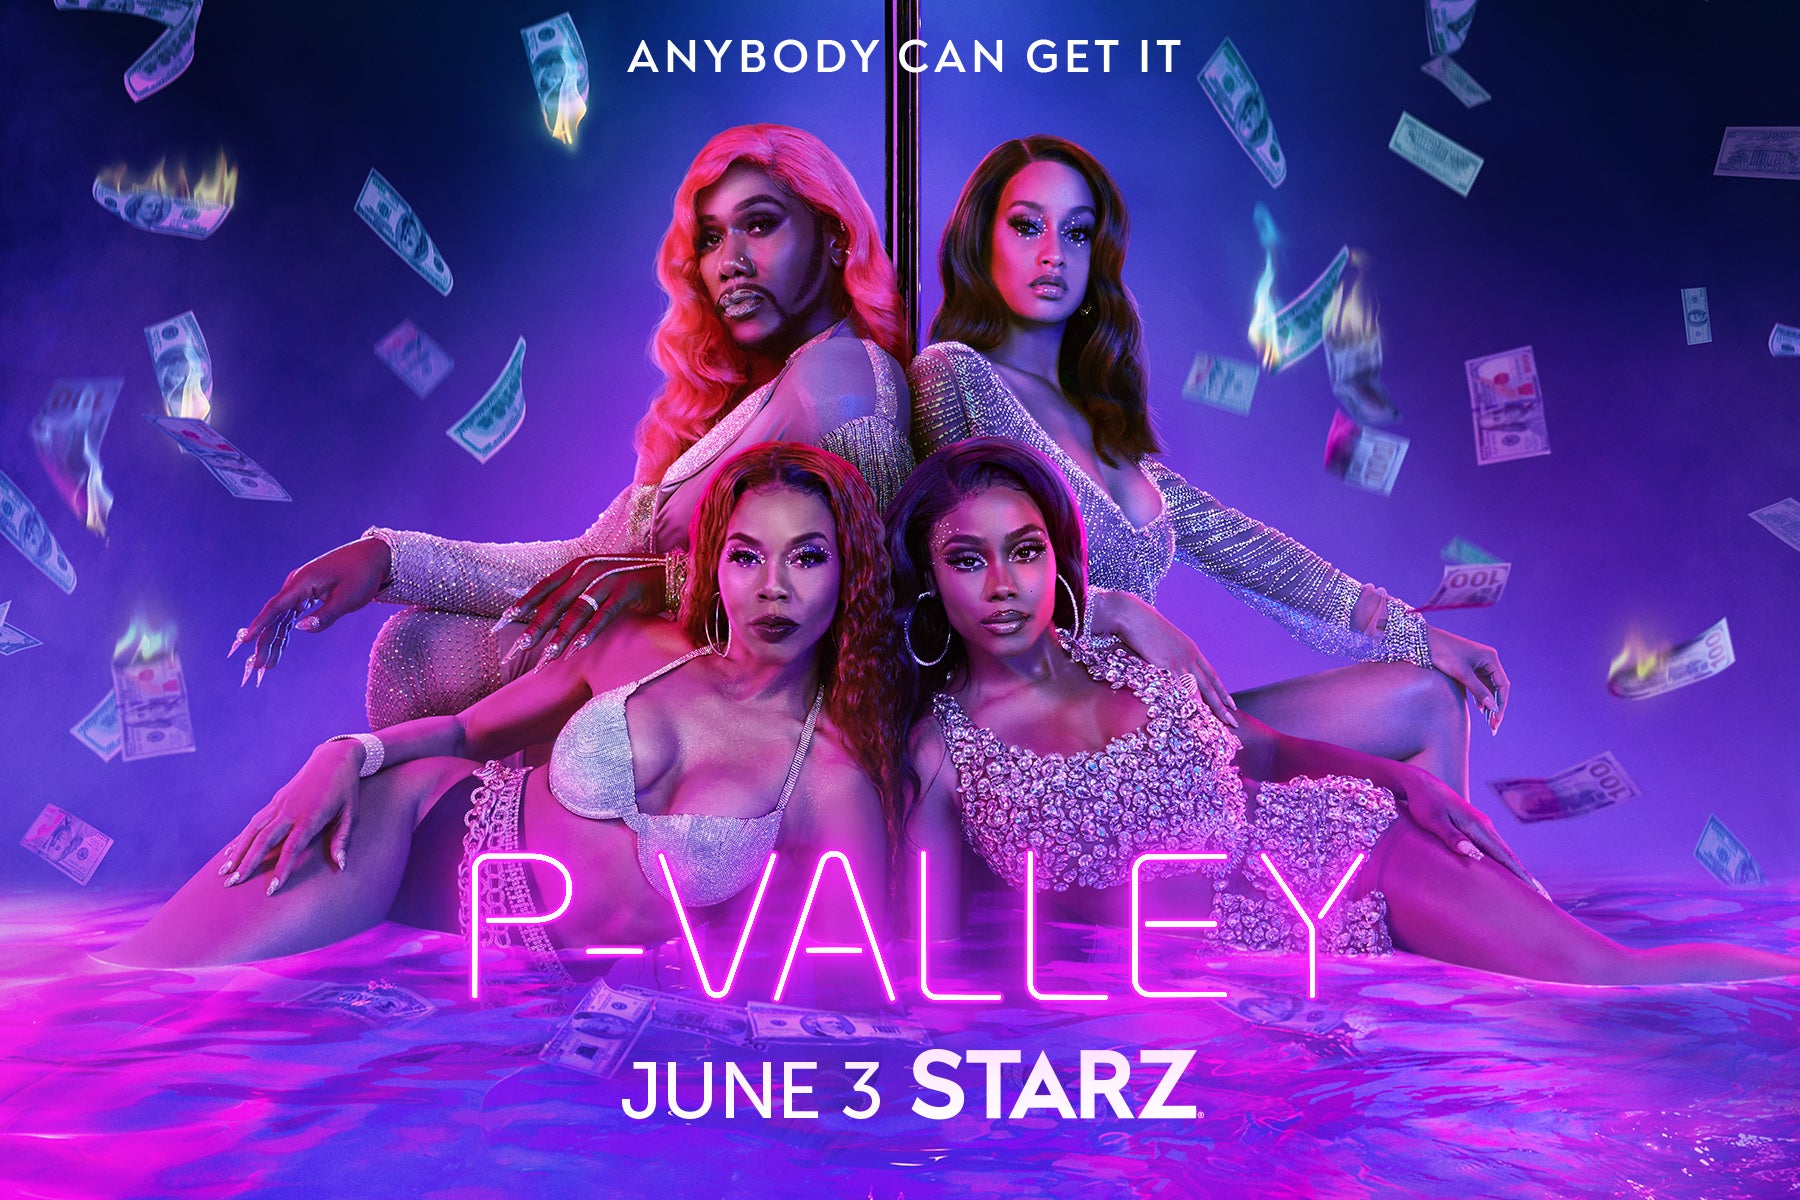 EXCLUSIVE: The Pynk Bounces Back In ‘P-Valley’ Season 2’s Trailer